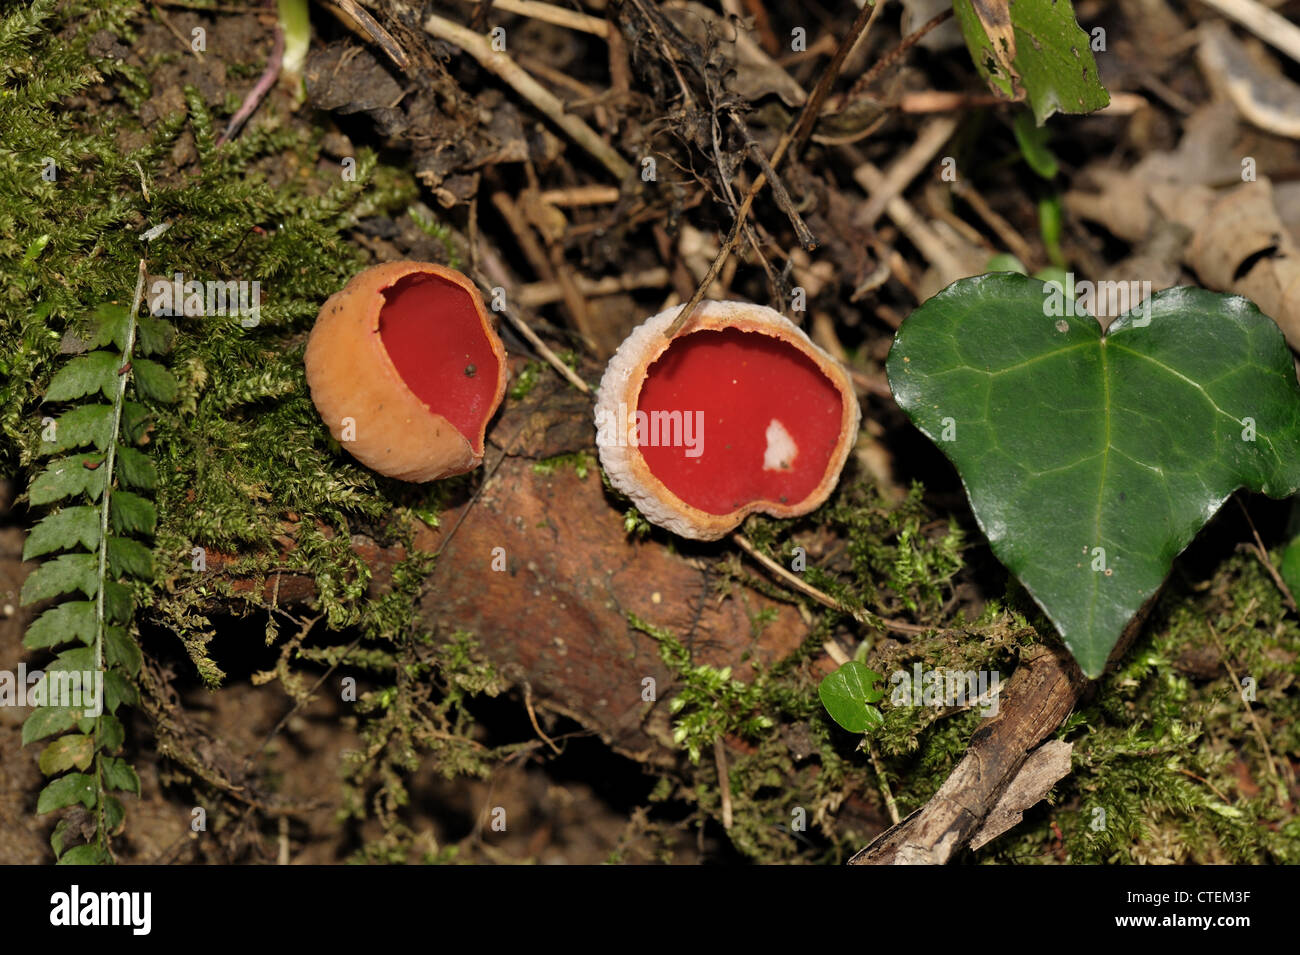 Scarlet elf cup Sarcoscypha coccinea saprophytic fungus on wood Stock Photo